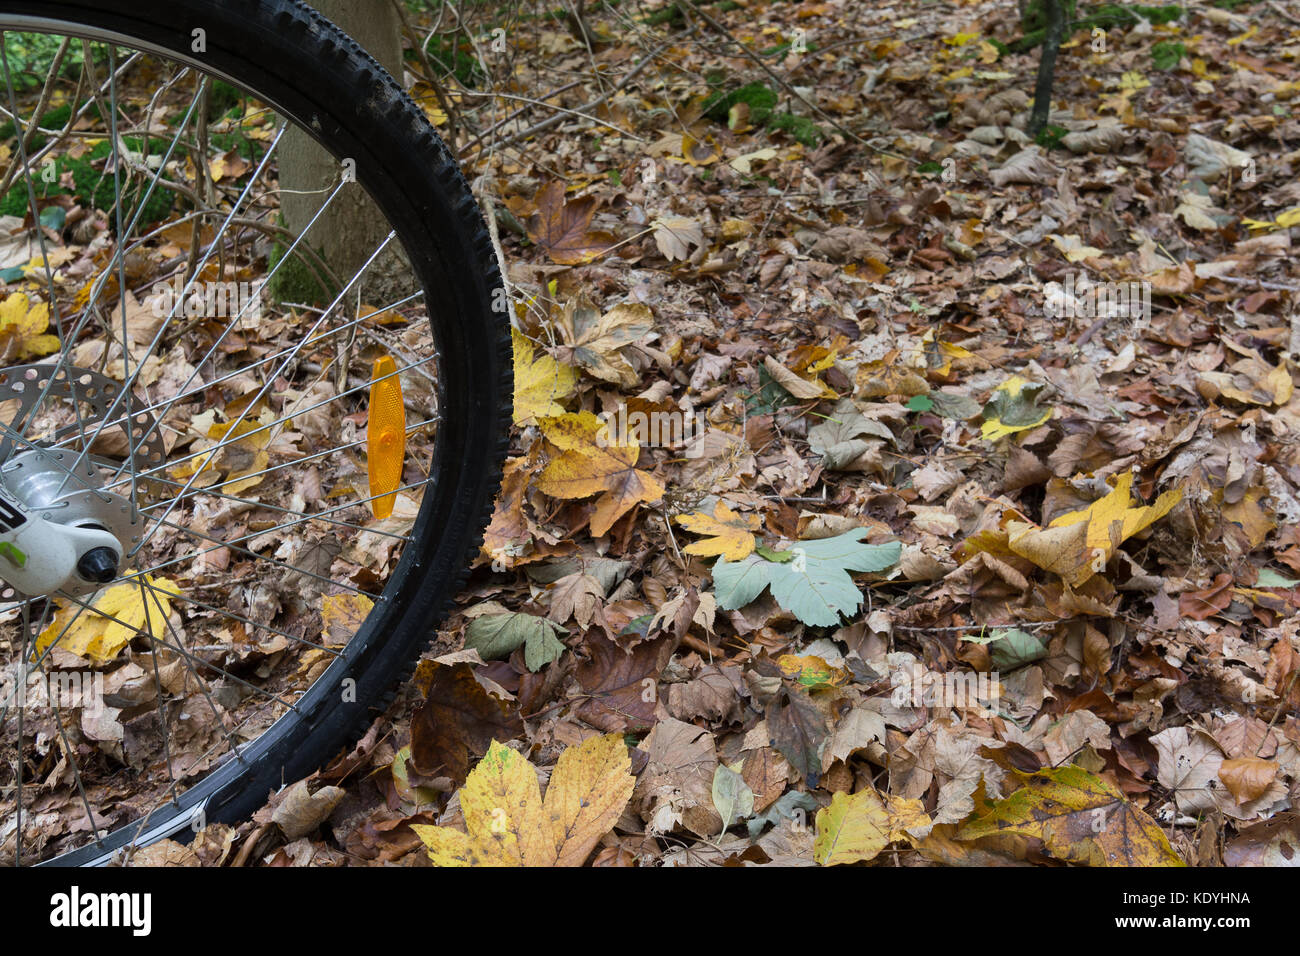 The wheel of a mountainbike rolling over yellow leaves in the fall, Denmark, October 16, 2017 Stock Photo